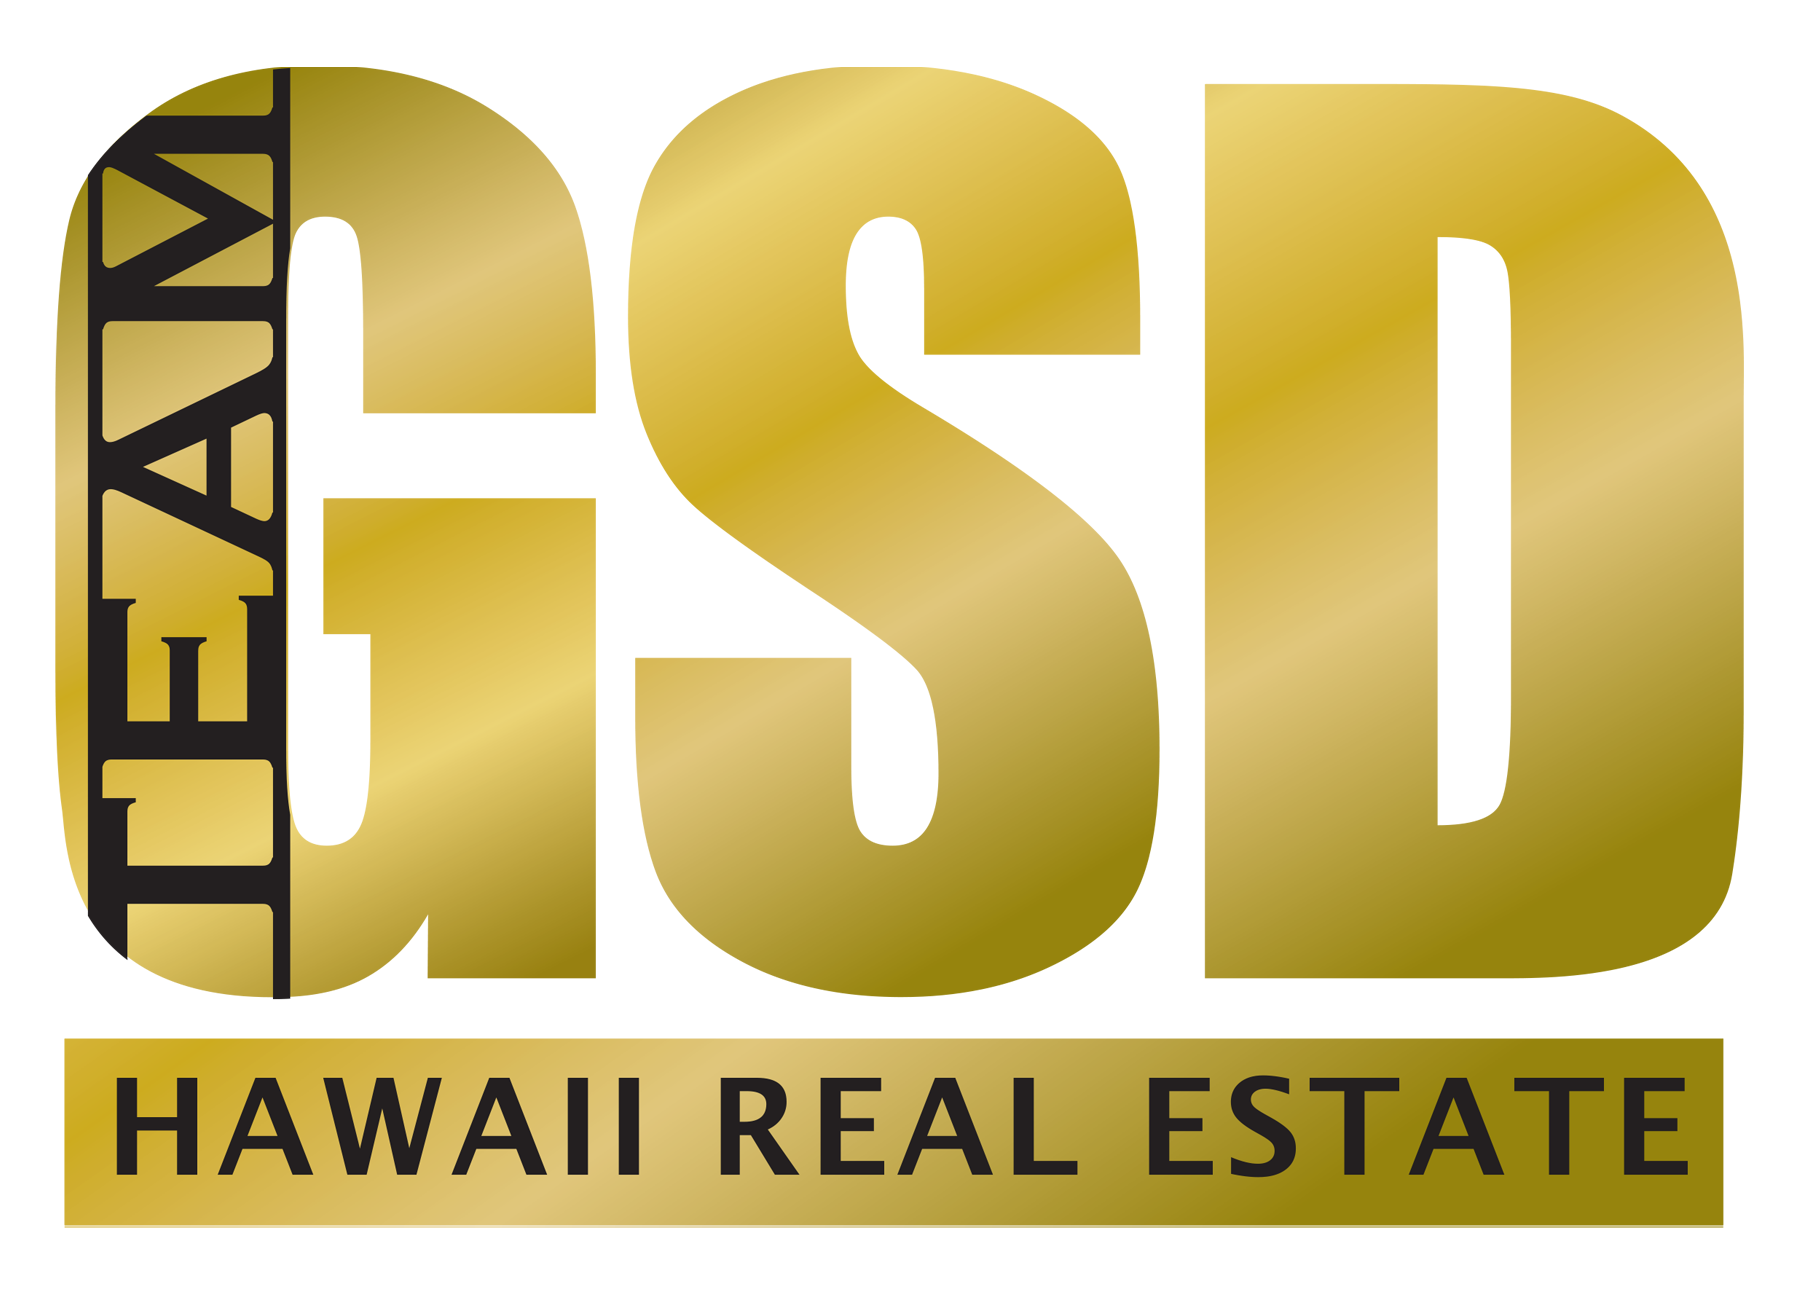 Hawaii's Trusted Commercial and Residential Real Estate Experts